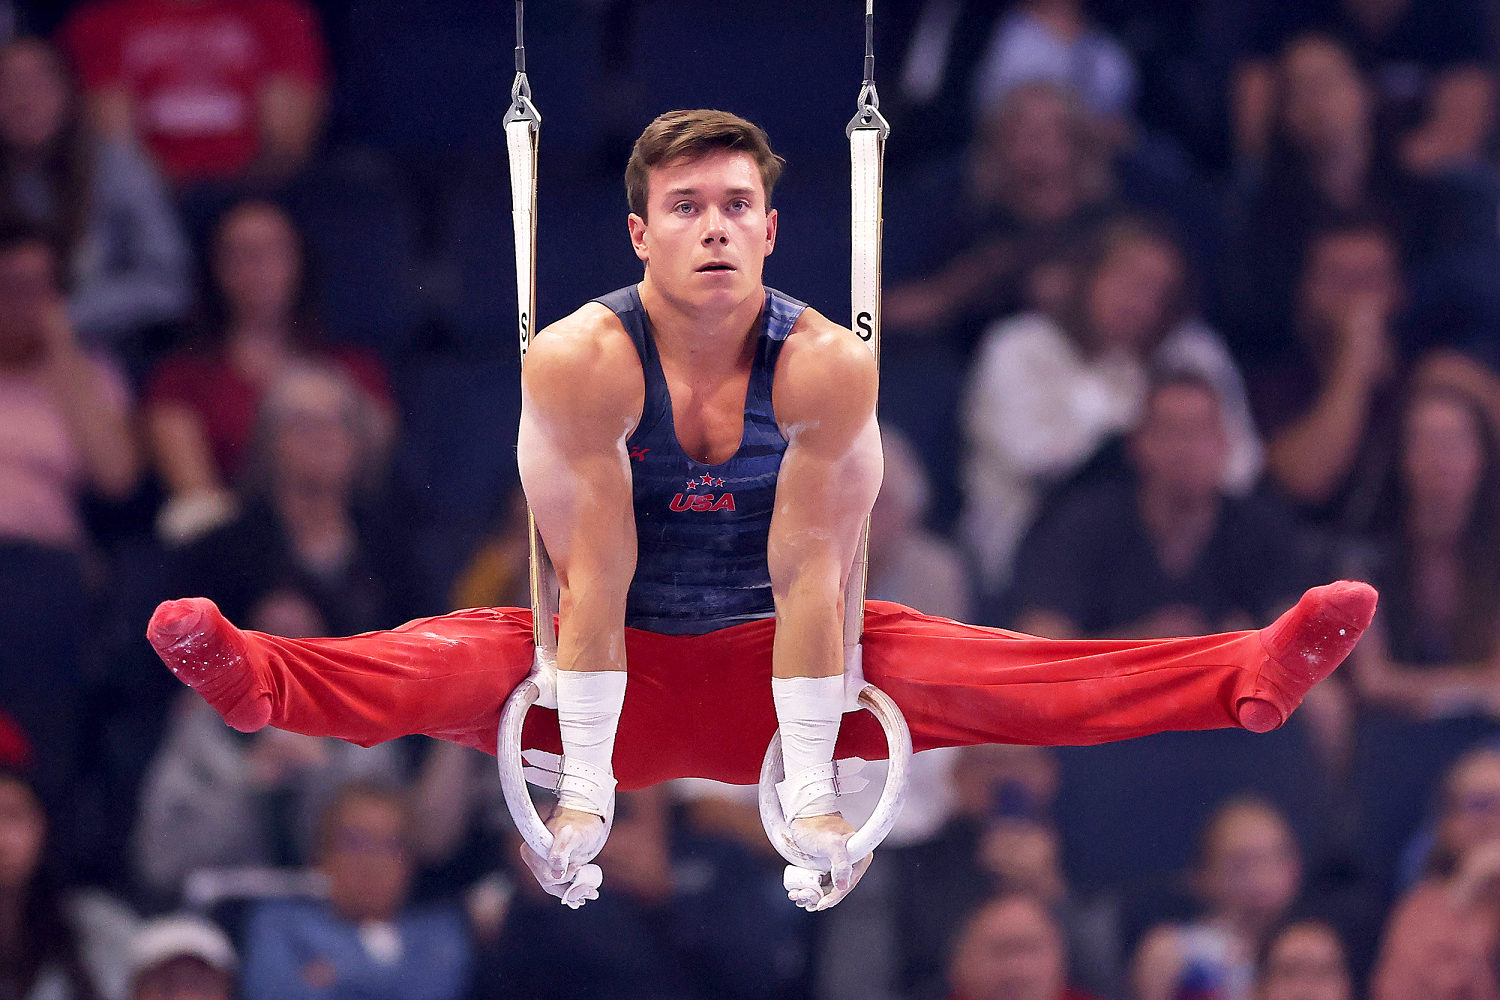 After a devastating knee injury, gymnast Brody Malone is back and ready to medal in Paris